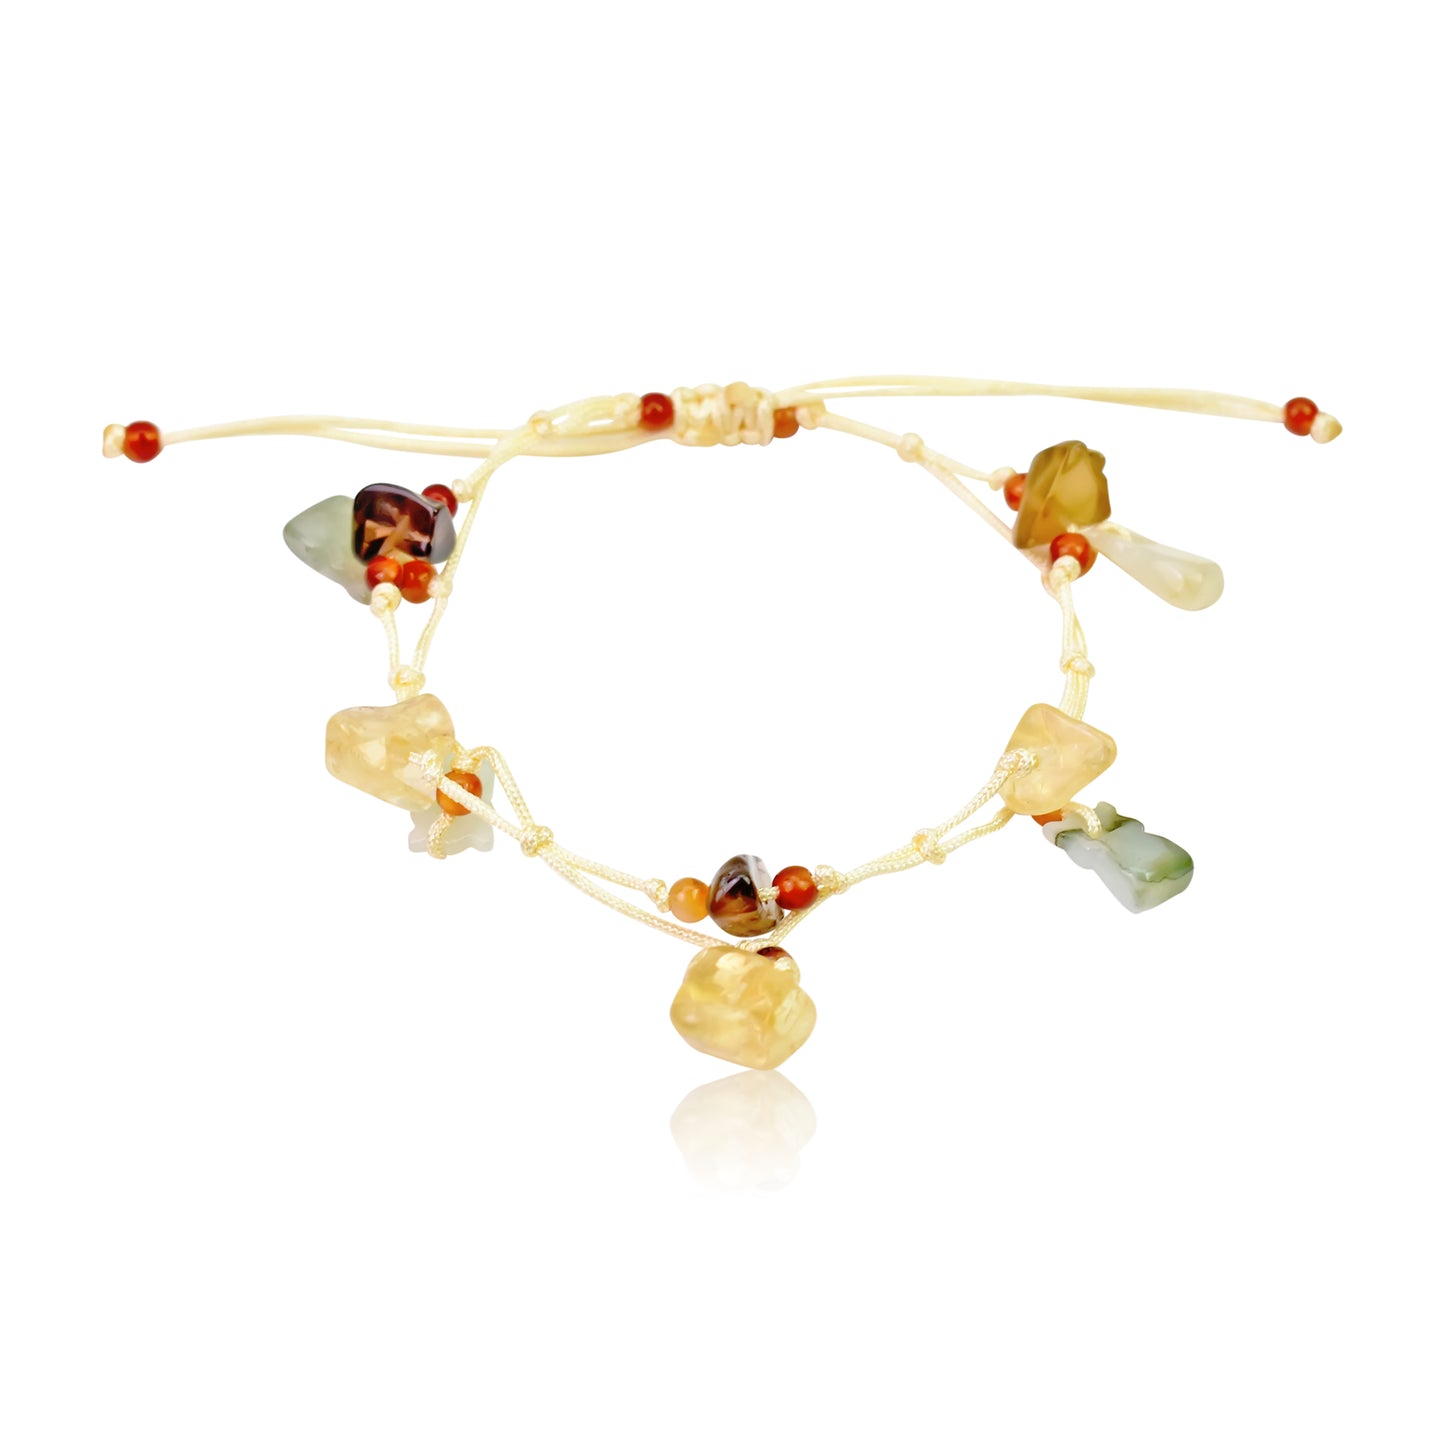 Attract Wealth and Fortune with this Money Pouch Gemstones Bracelet